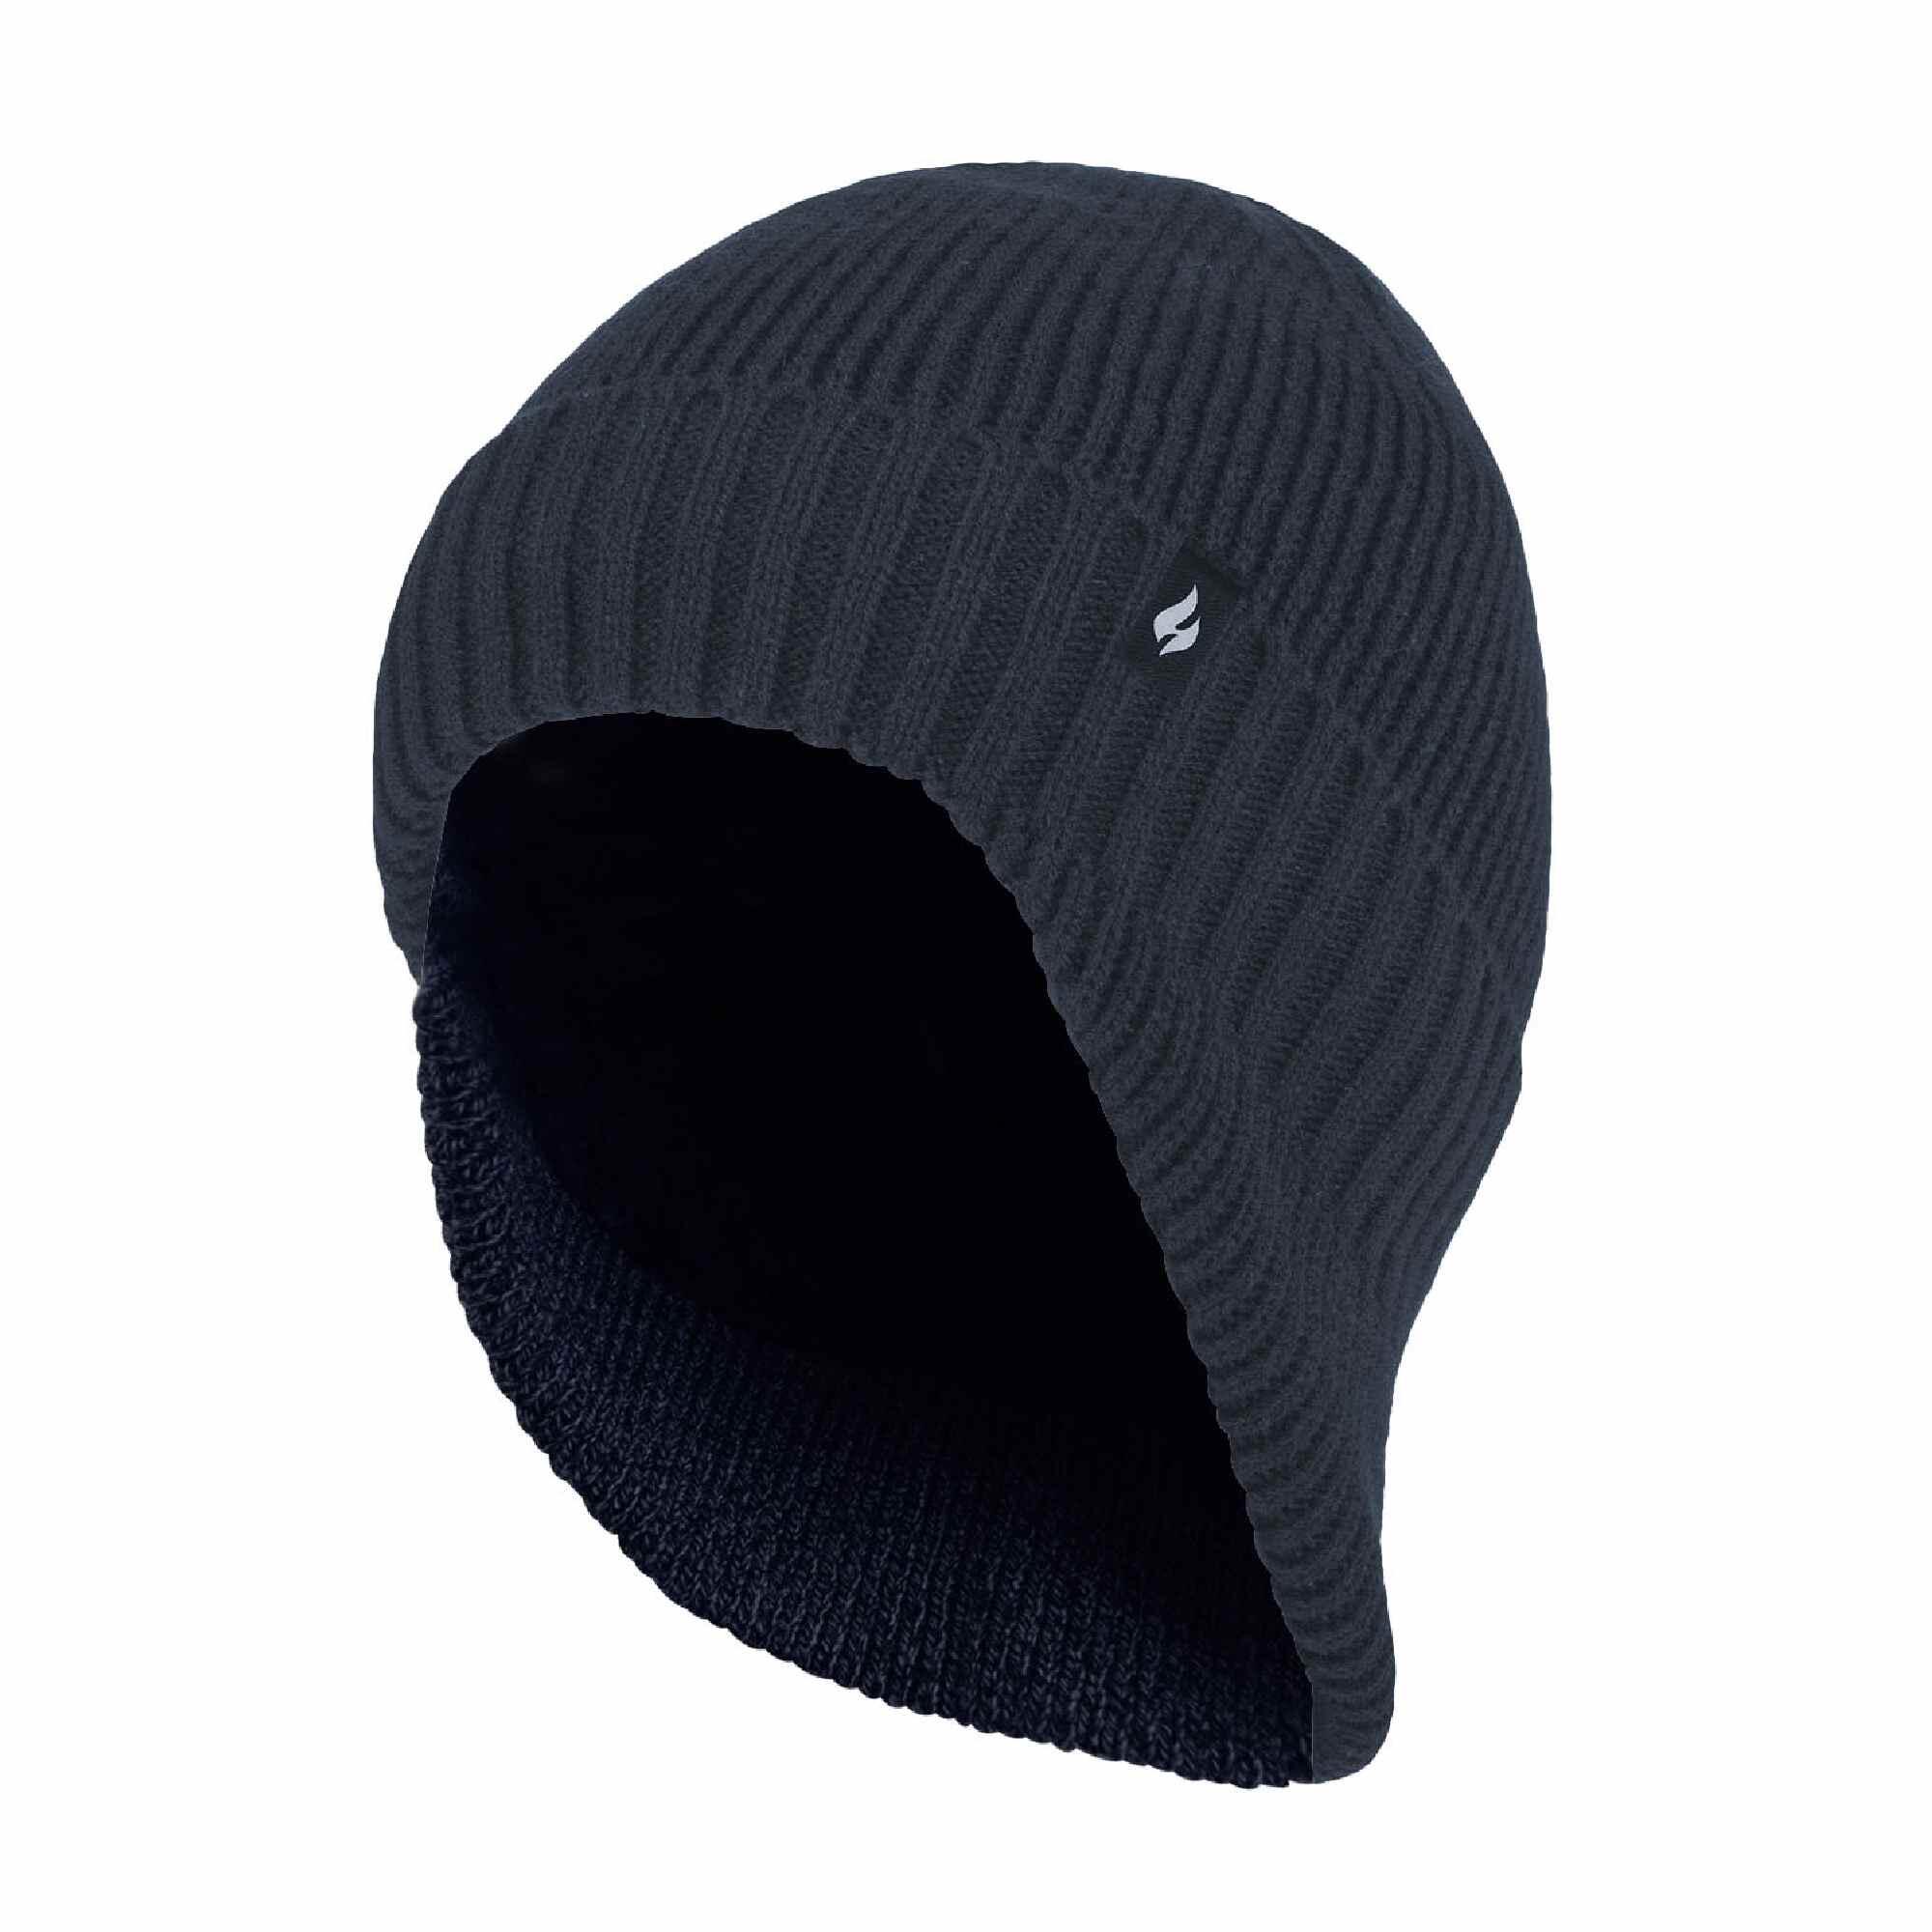 HEAT HOLDERS Thermal Winter Warm Expedition Hat with Drop Neck for Men